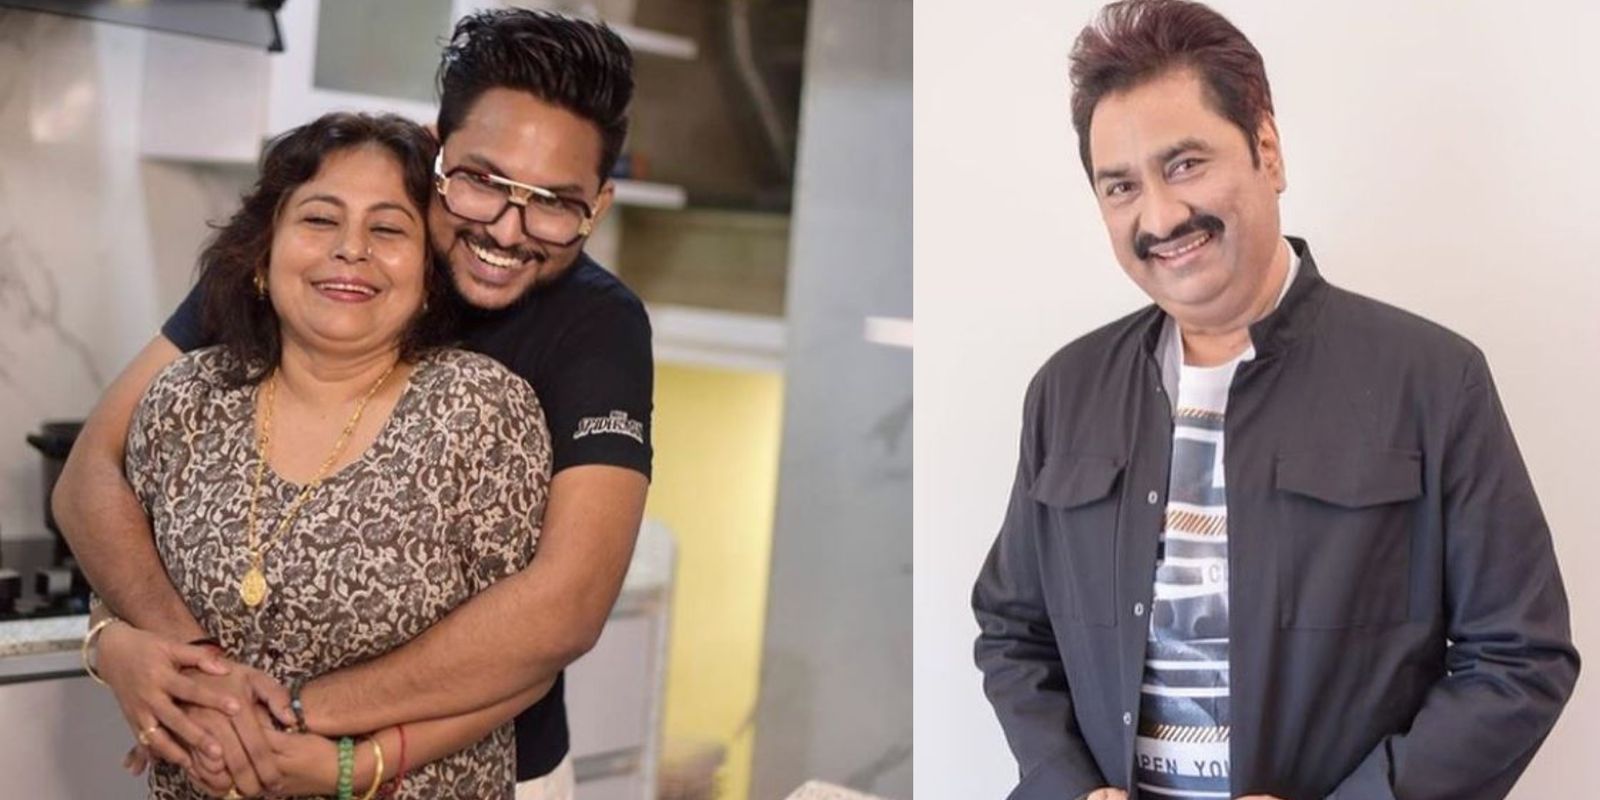 Bigg Boss 14: Jaan Kumar Sanu Hits Out At Father Kumar Sanu; Says 'How Could He Question My Upbringing, What Would He Even Know About It?'